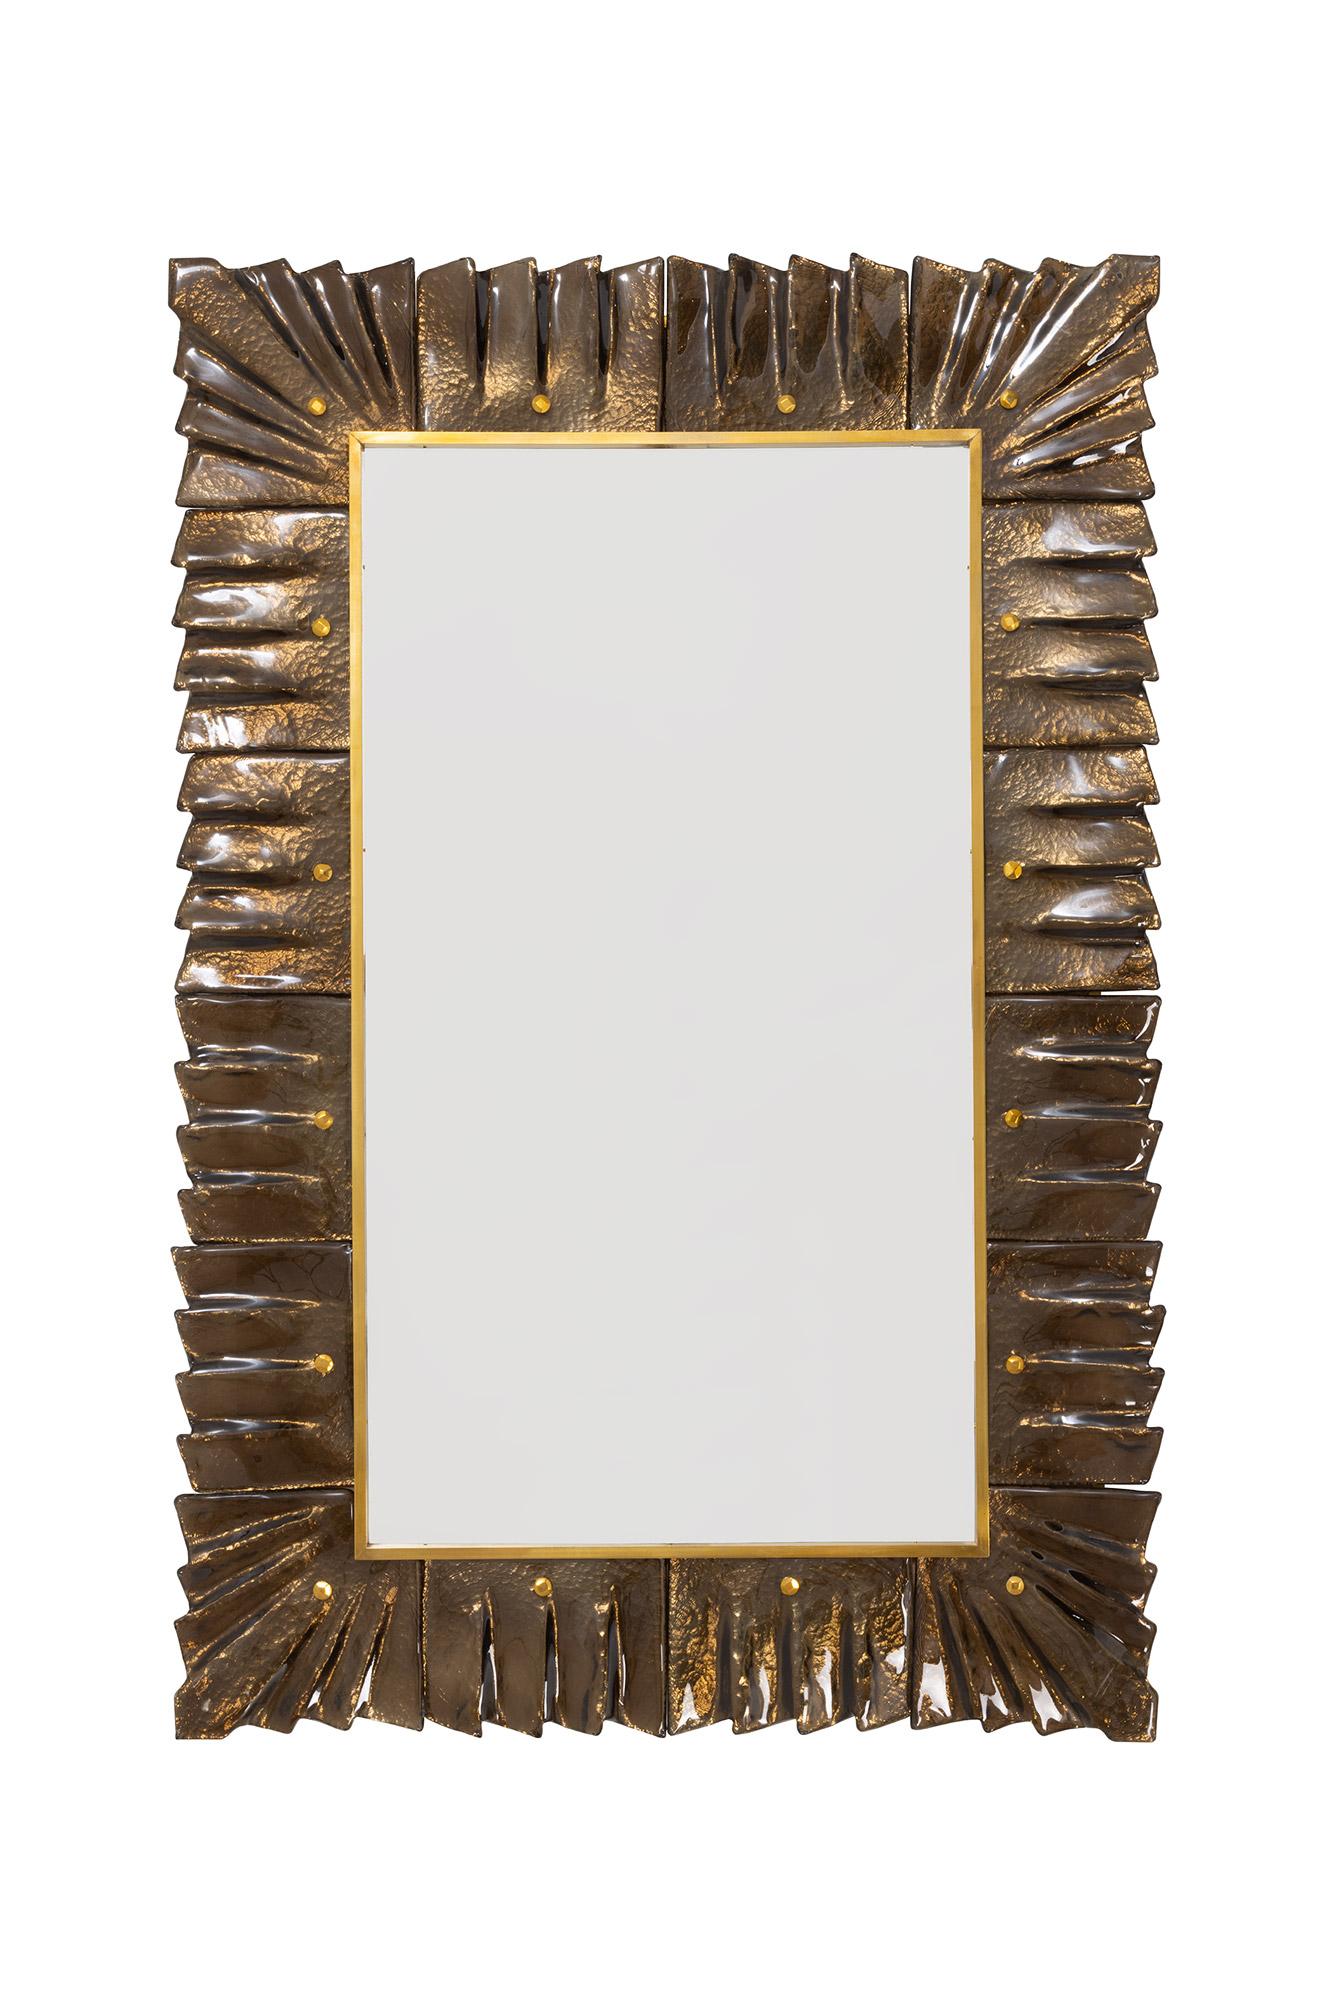 Contemporary rectangular Murano amber, bronze shade glass framed mirror, in stock
Mirror plate surrounded with undulating glass tiles in bronze/amber color held by brass cabochons. 
Handcrafted by a team of artisans in Venice, Italy. 
Can be easily